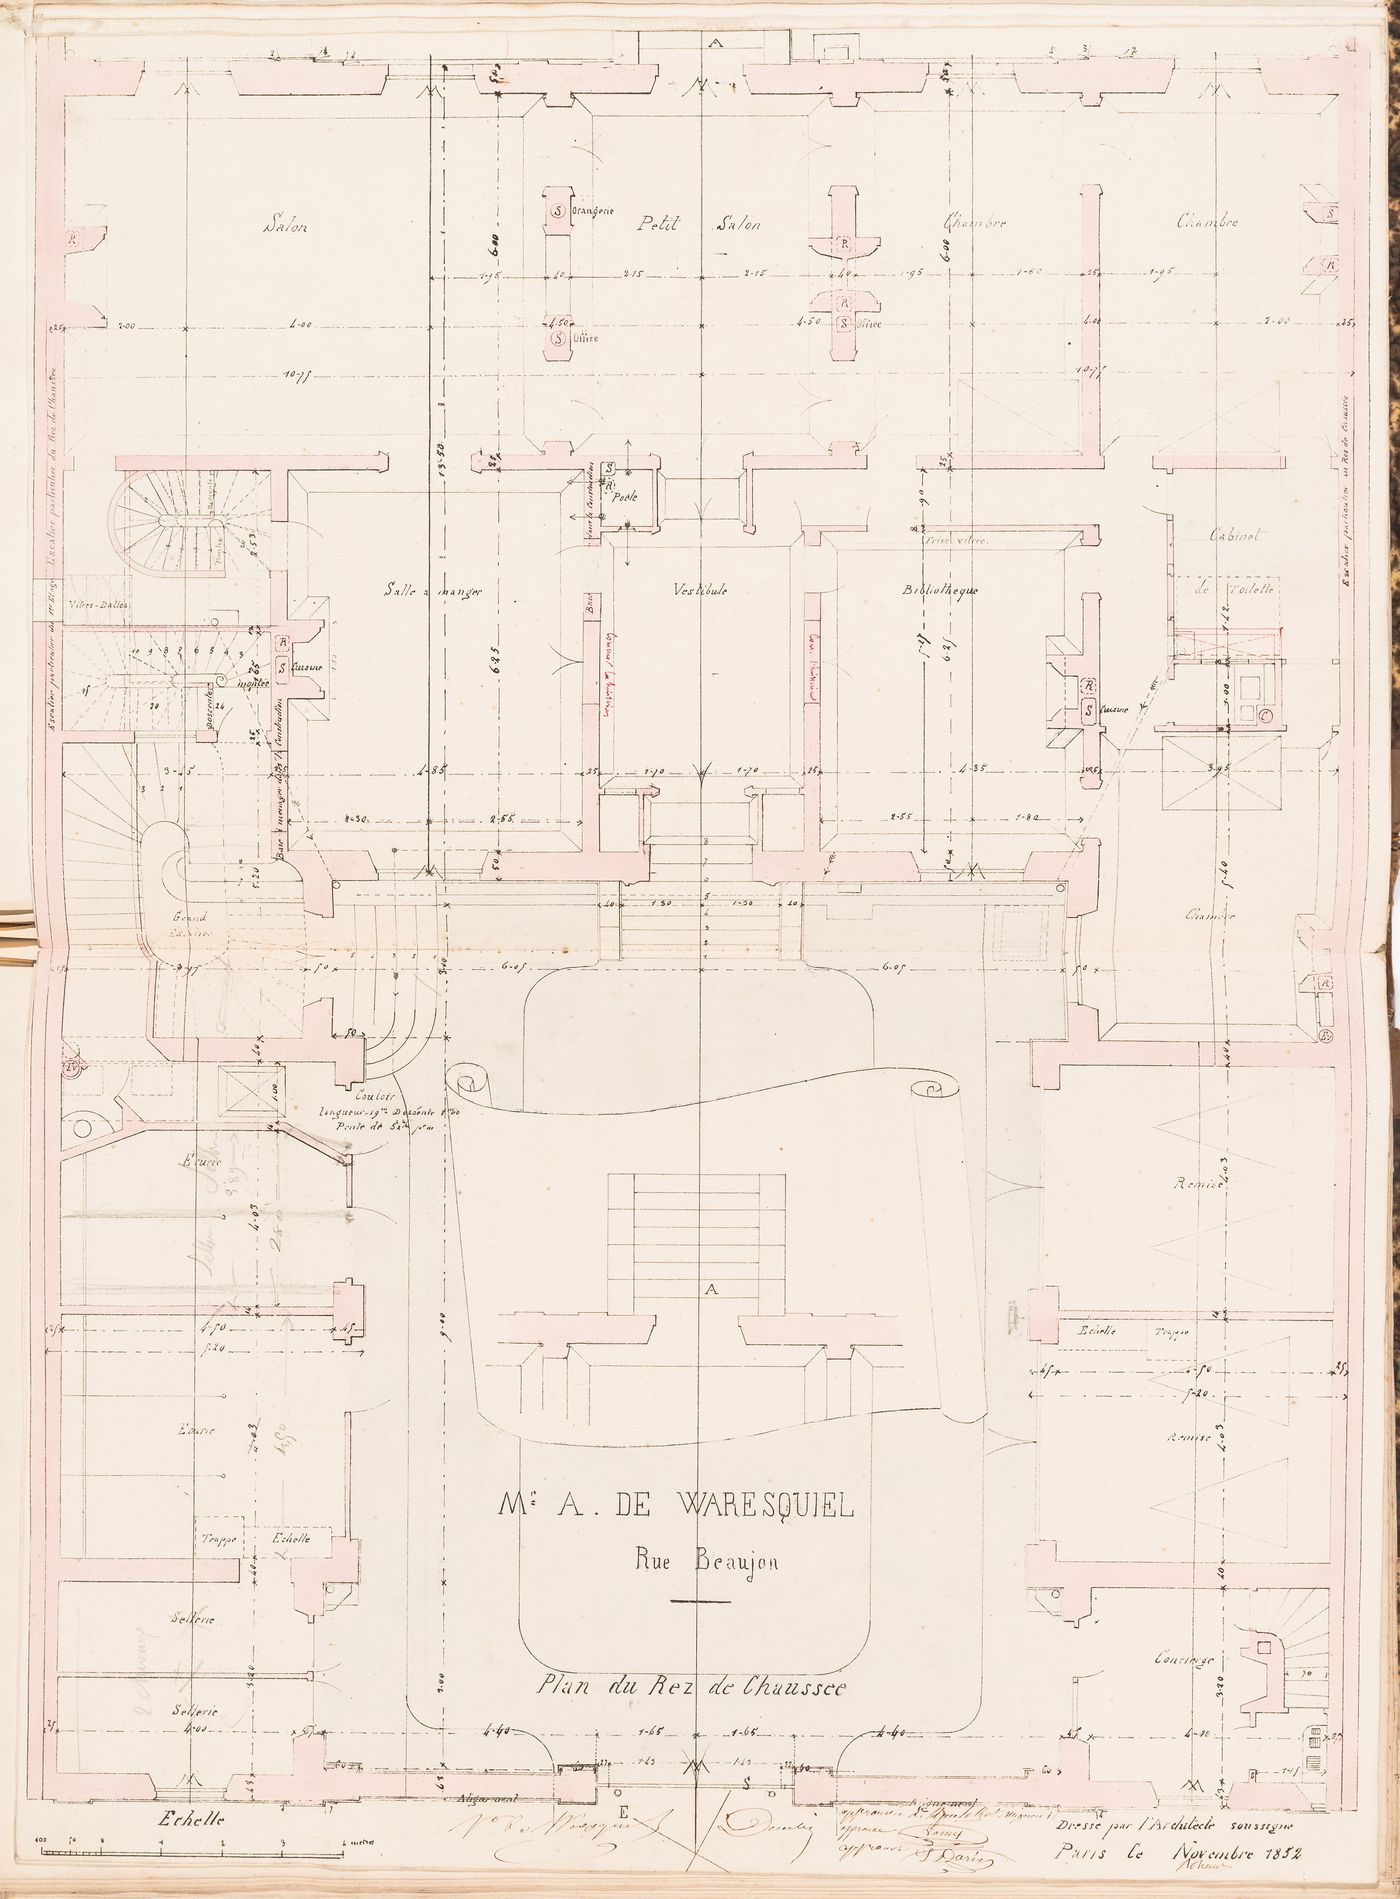 Contract drawing for a house for Monsieur A. Waresquiel, rue Beaujon, Paris: Ground floor plan